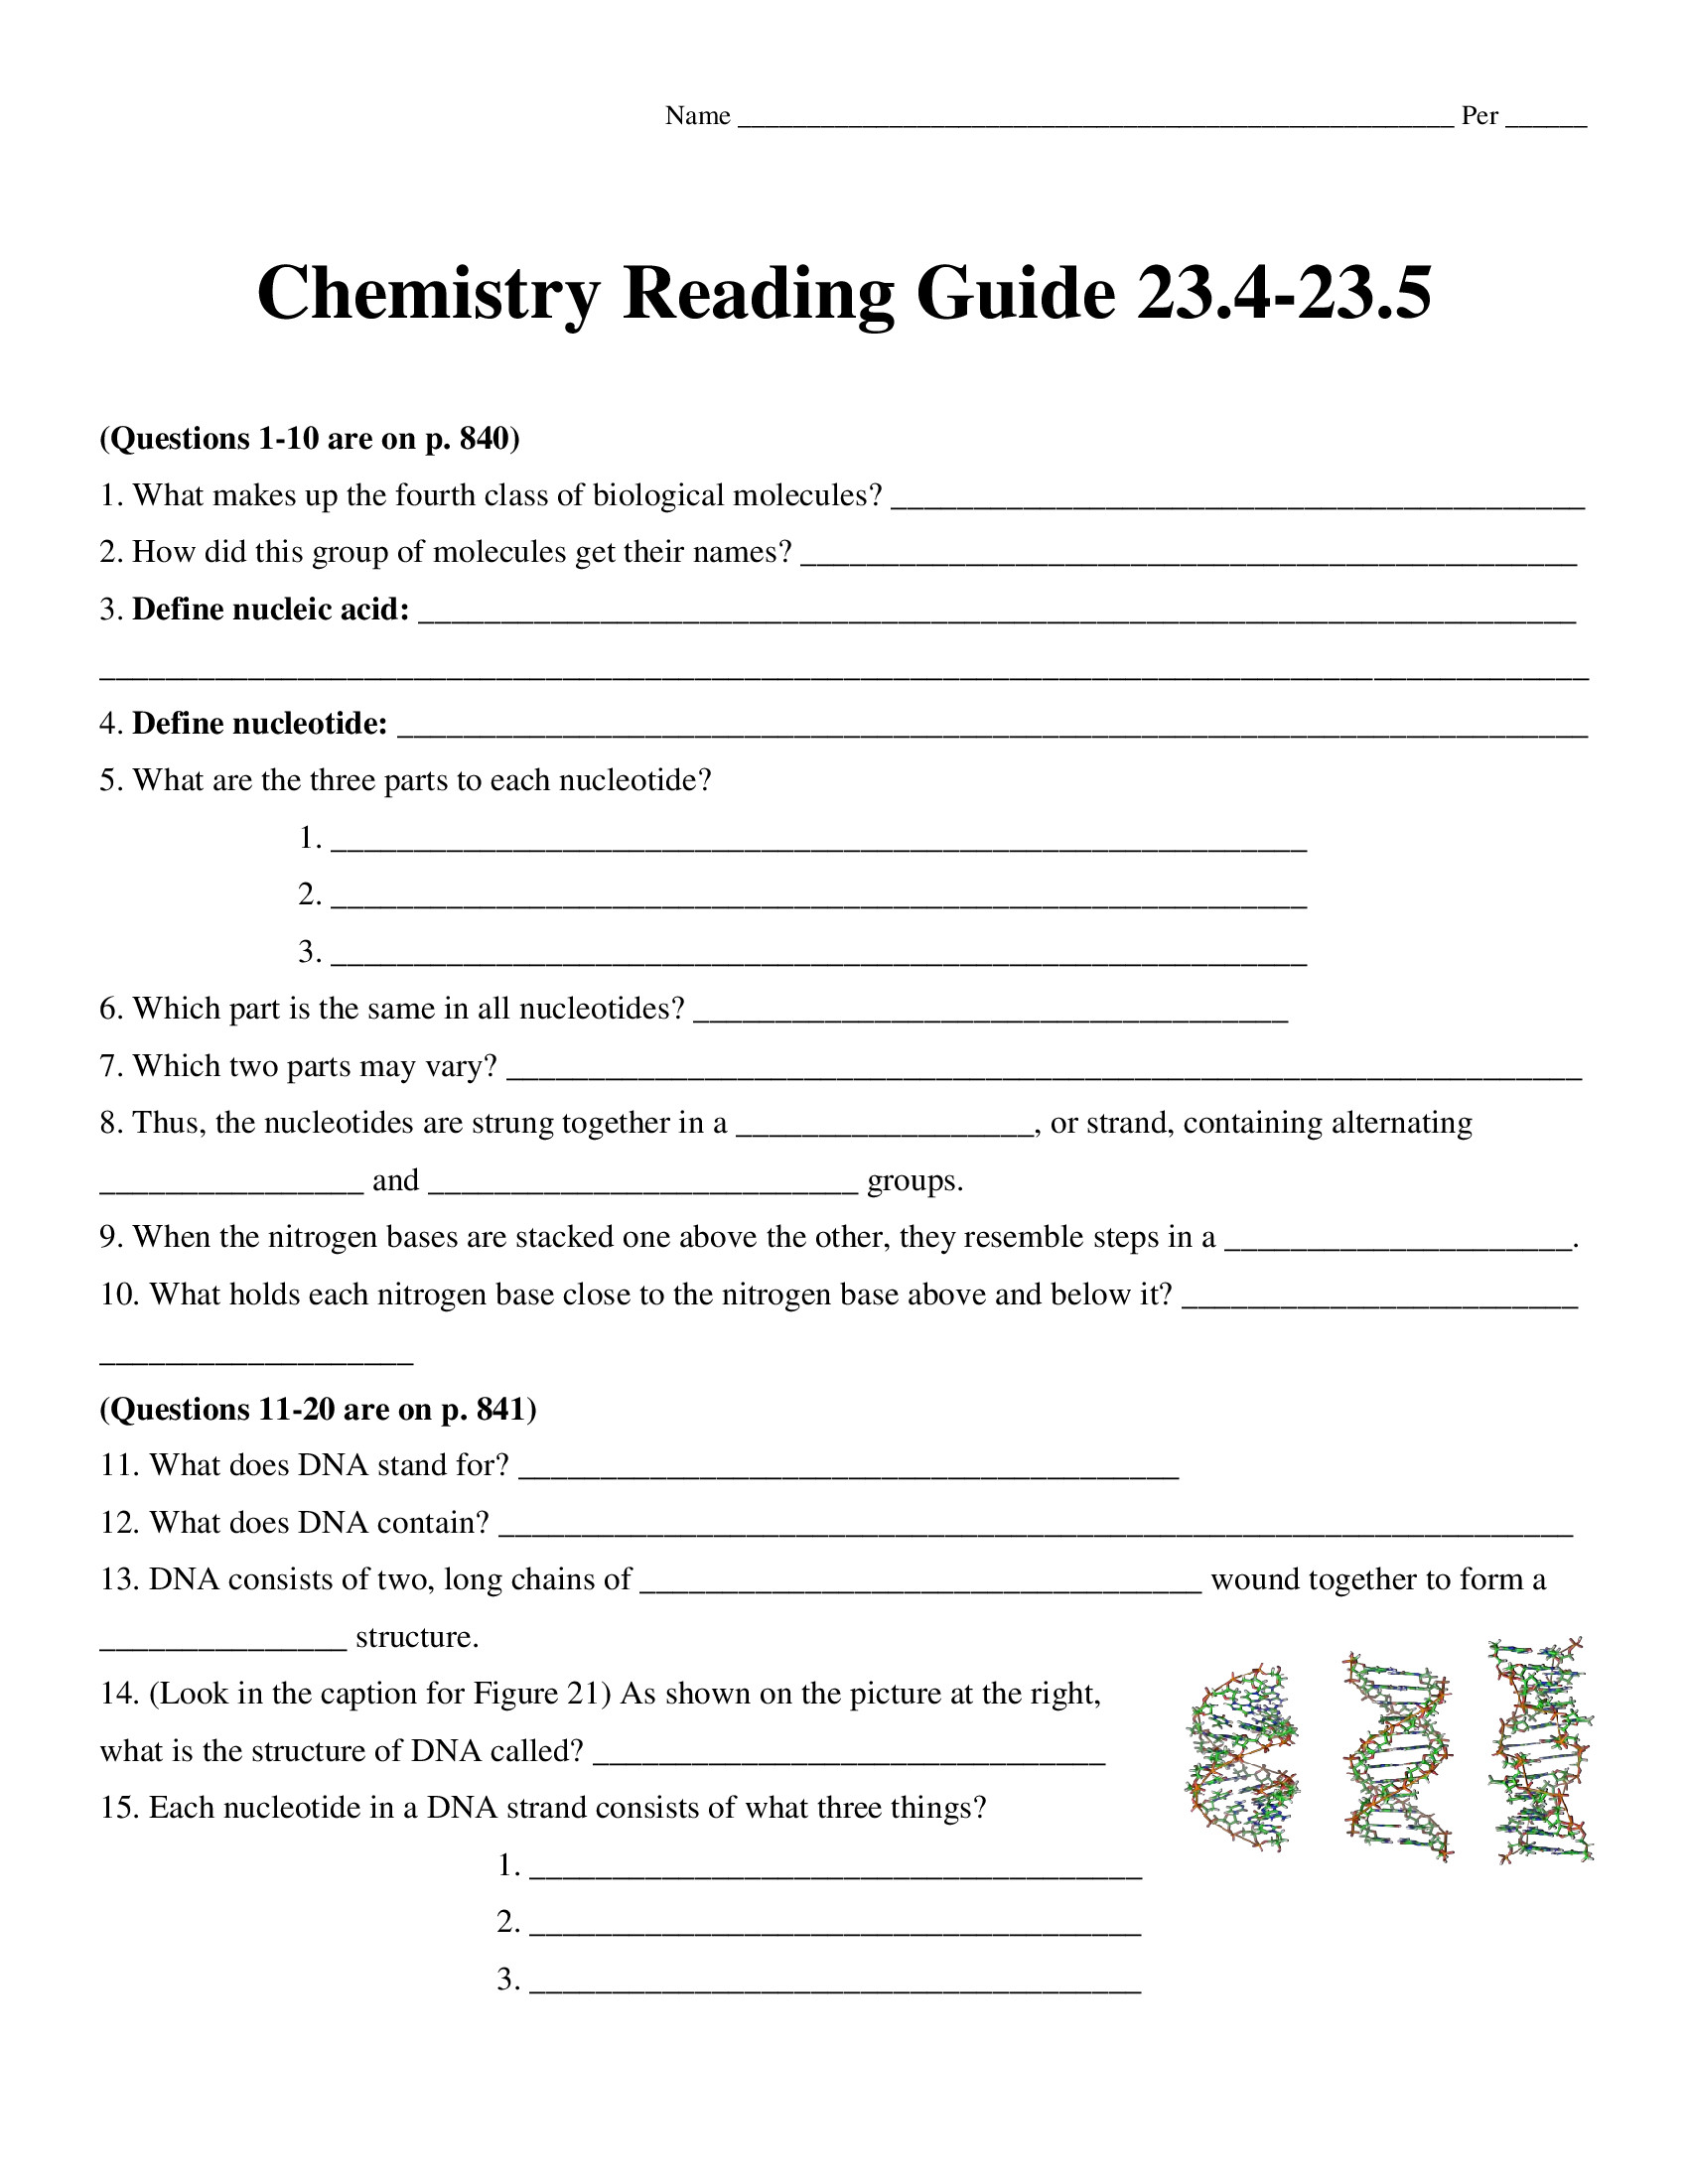 Chemistry Of Life Worksheet Chemistry Matter and Change 2013 Reading Guide Worksheet Chapter 23 4 23 5 the Chemistry Of Life